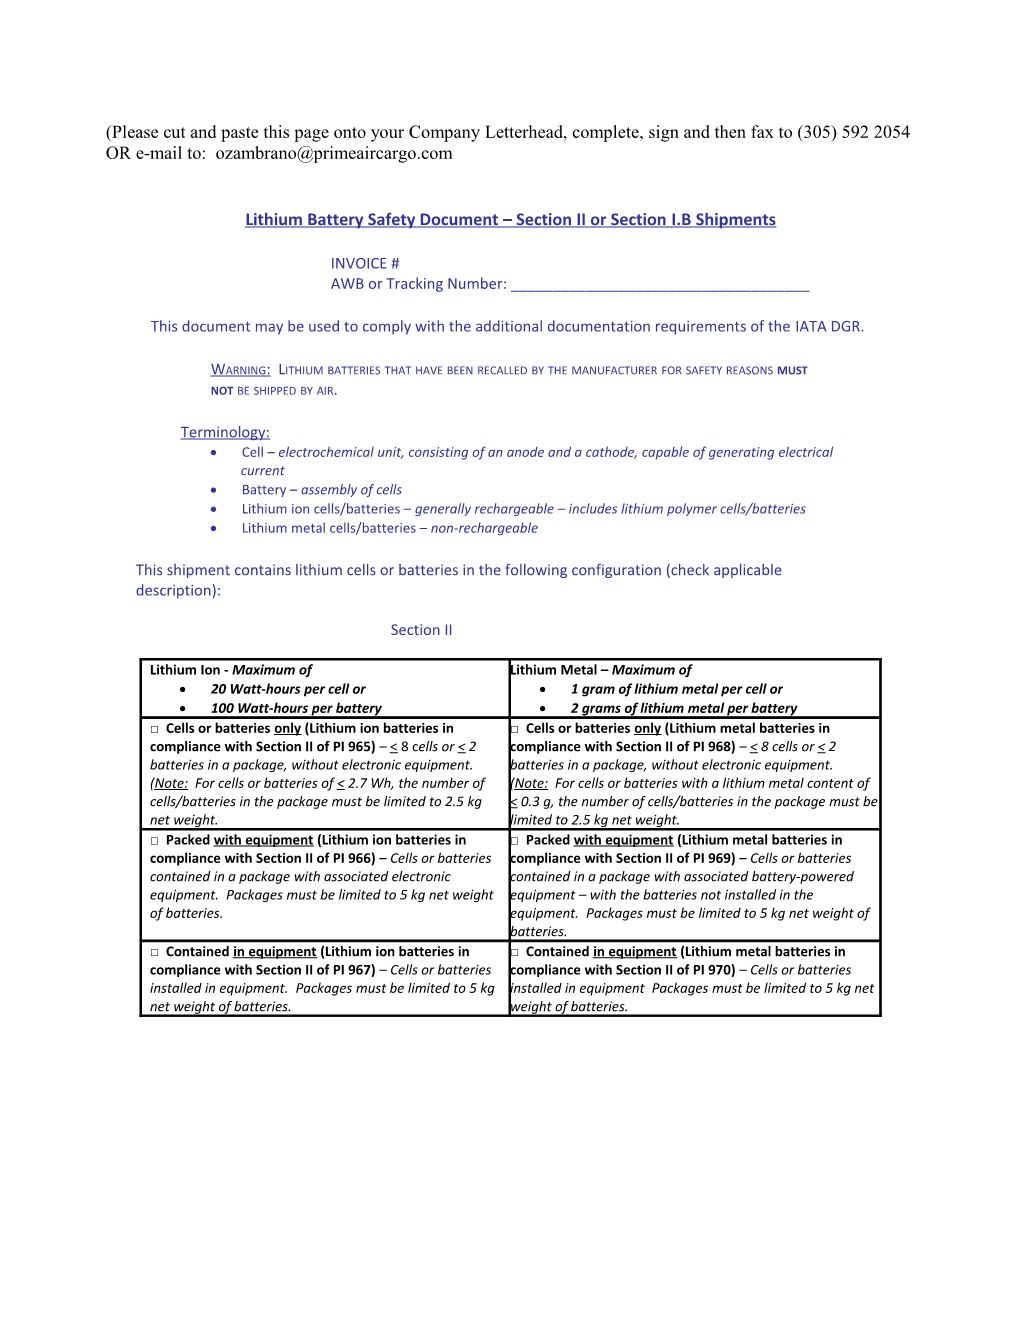 Lithium Battery Safety Document Section II Or Section I